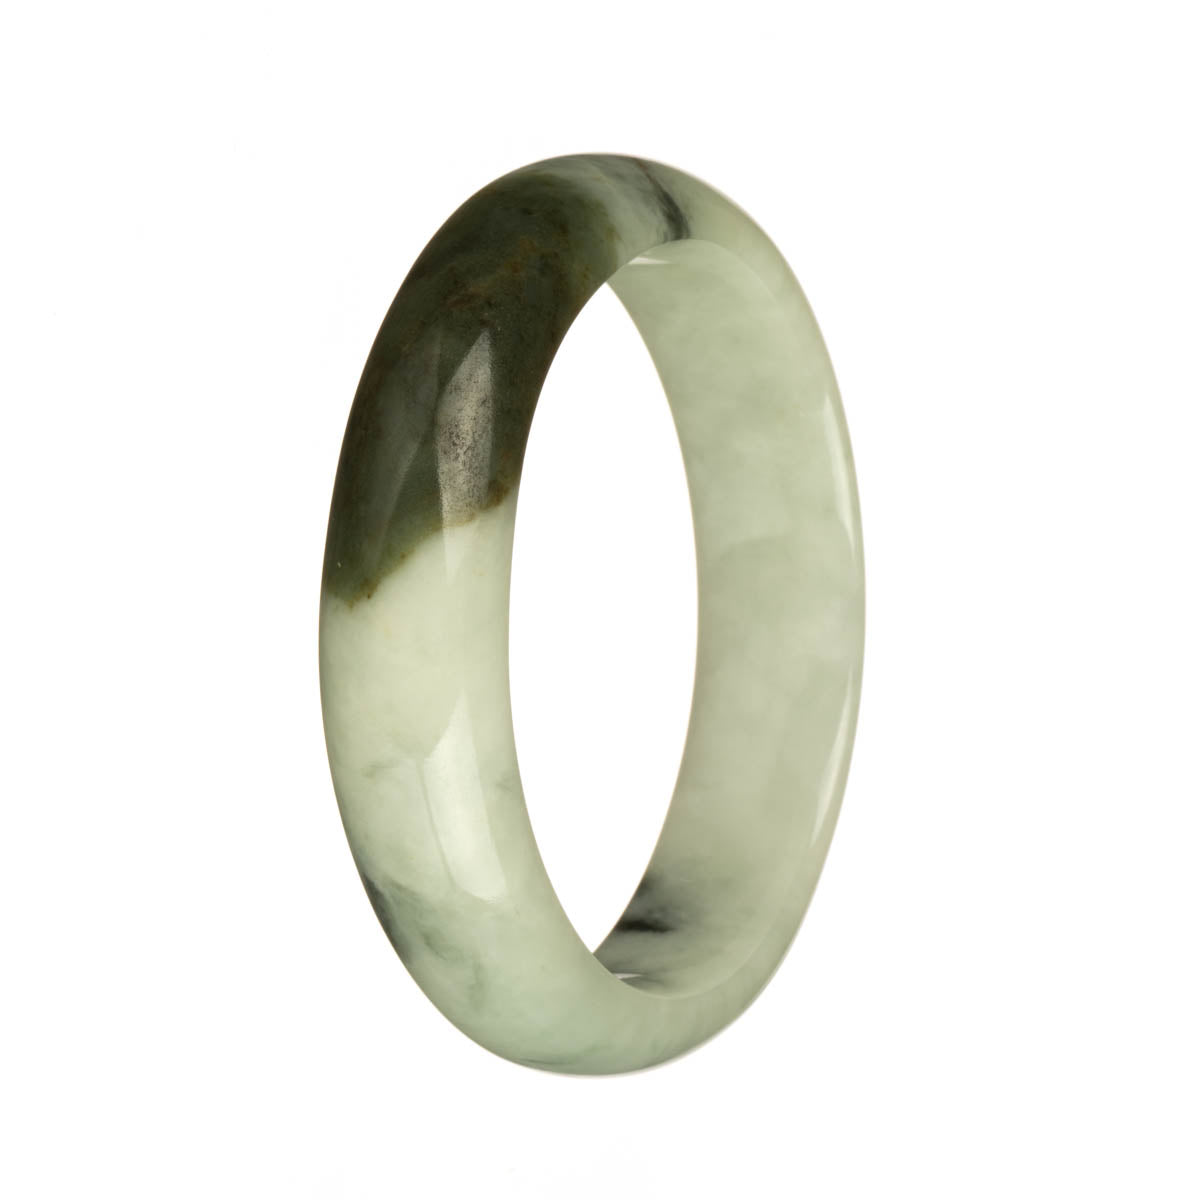 Genuine Grade A Pale Green with Olive Green and Deep Green Patterns Jadeite Bangle - 58mm Half Moon